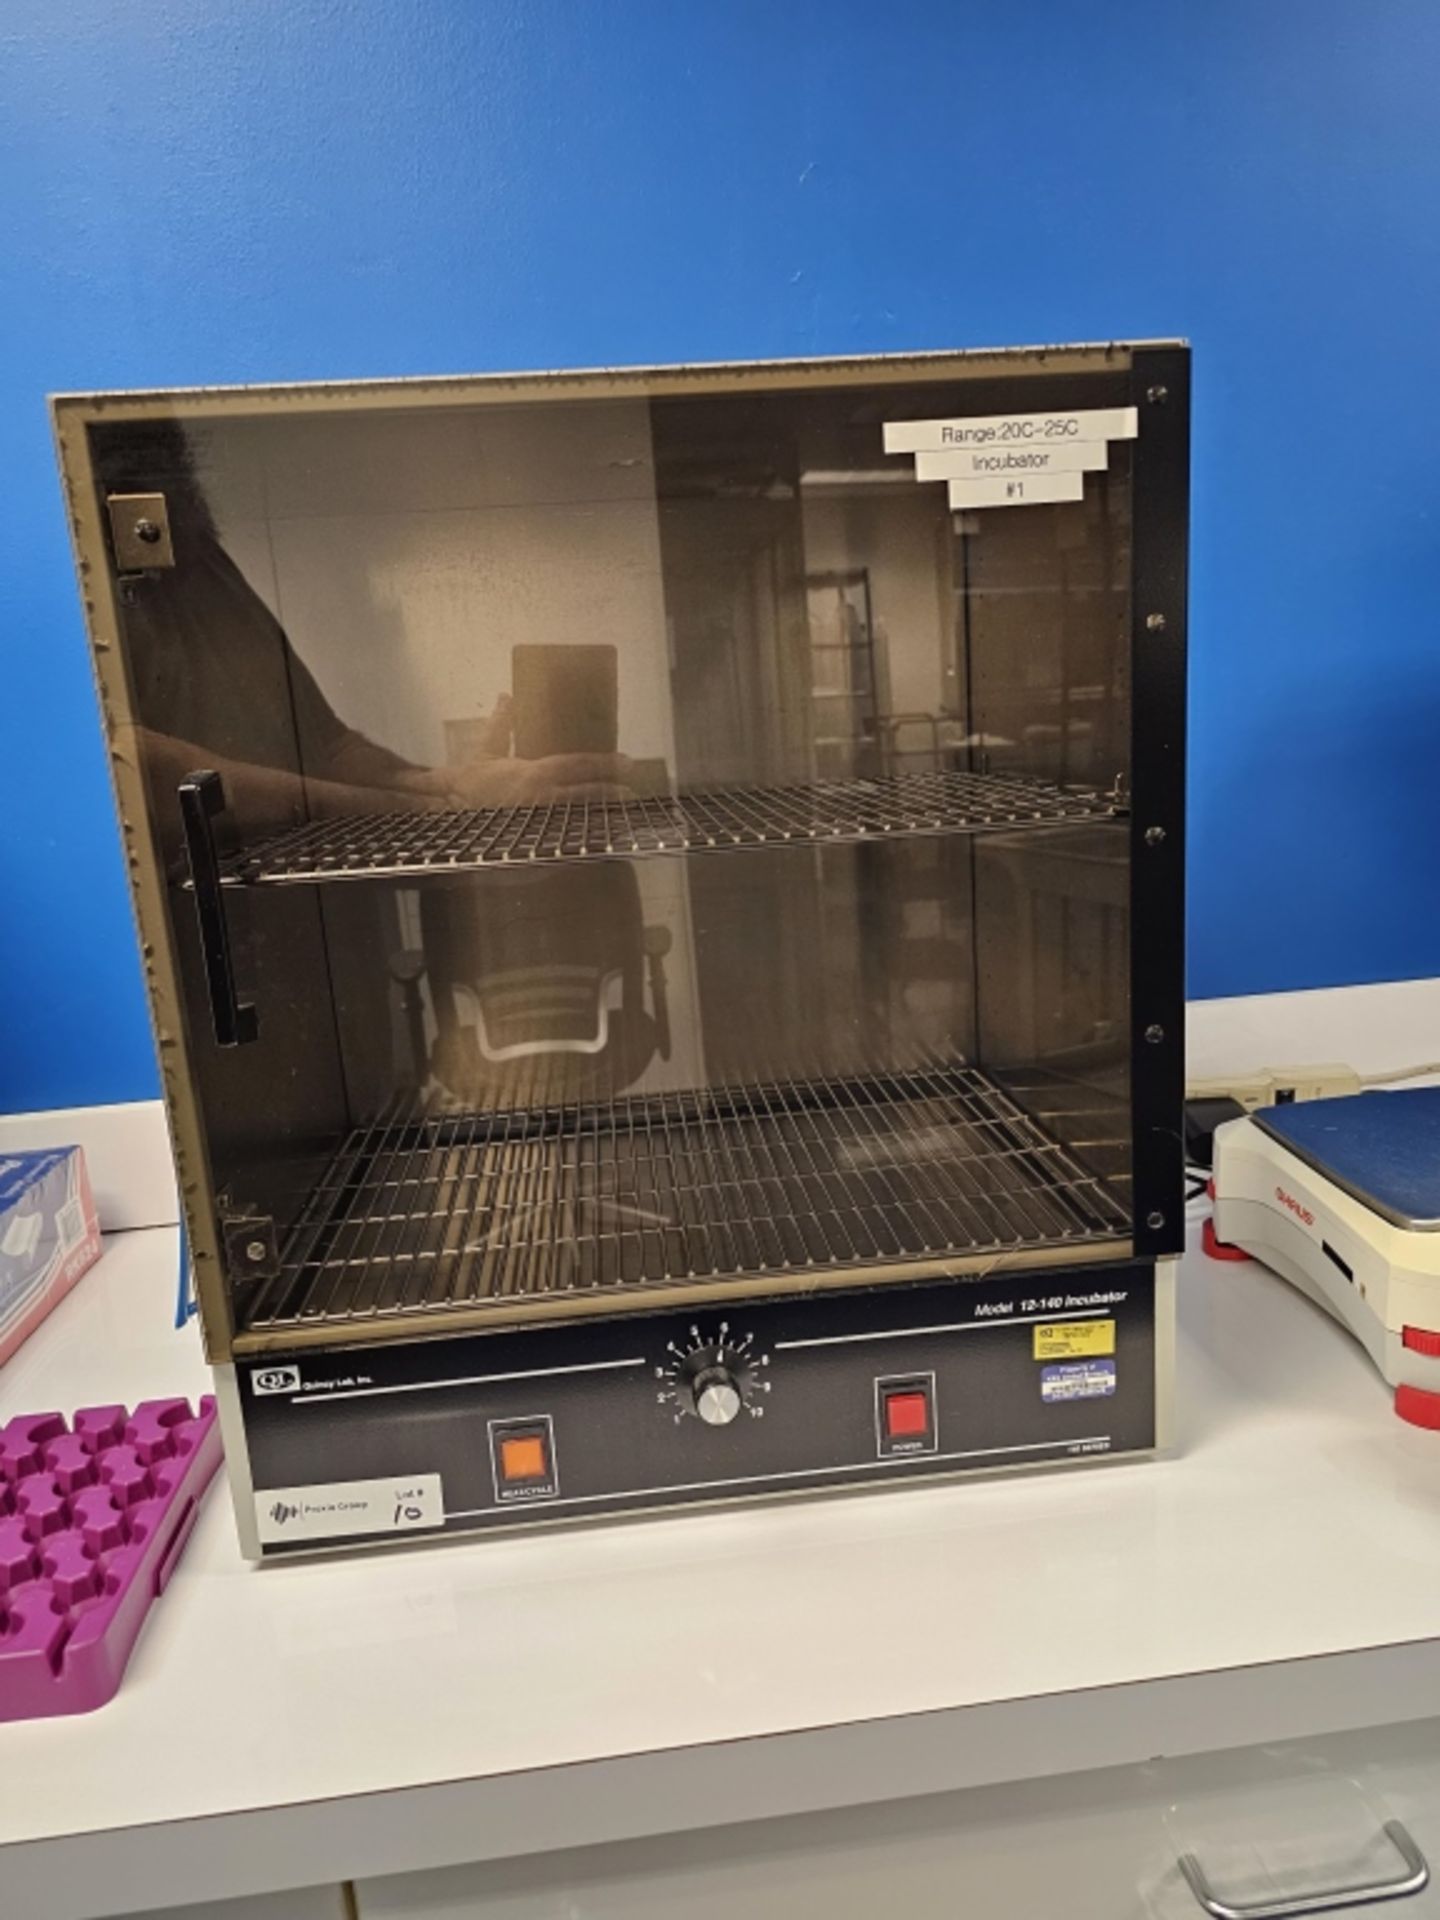 Quincy Lab 140 Series Model 12-140 Incubator sn T-07714 - Image 2 of 6